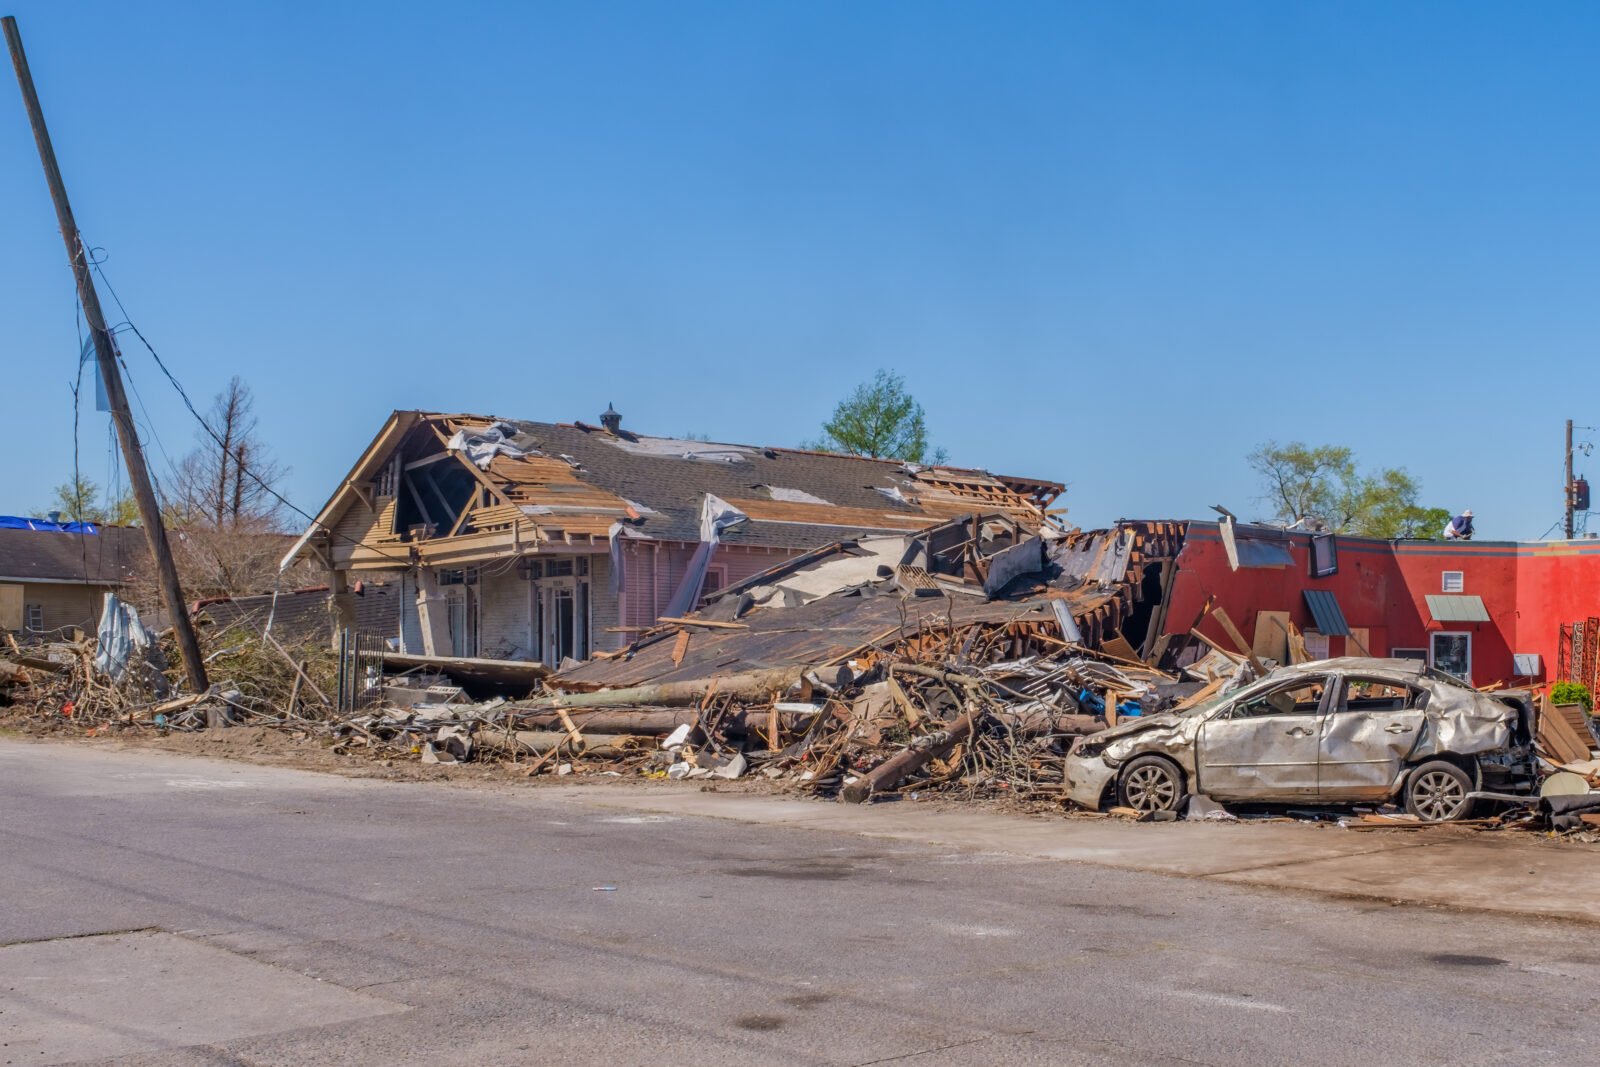 Severely Damaged Buildings and Car after Tornado Touched Down on March 22, 2022 in Arabi, LA, USA